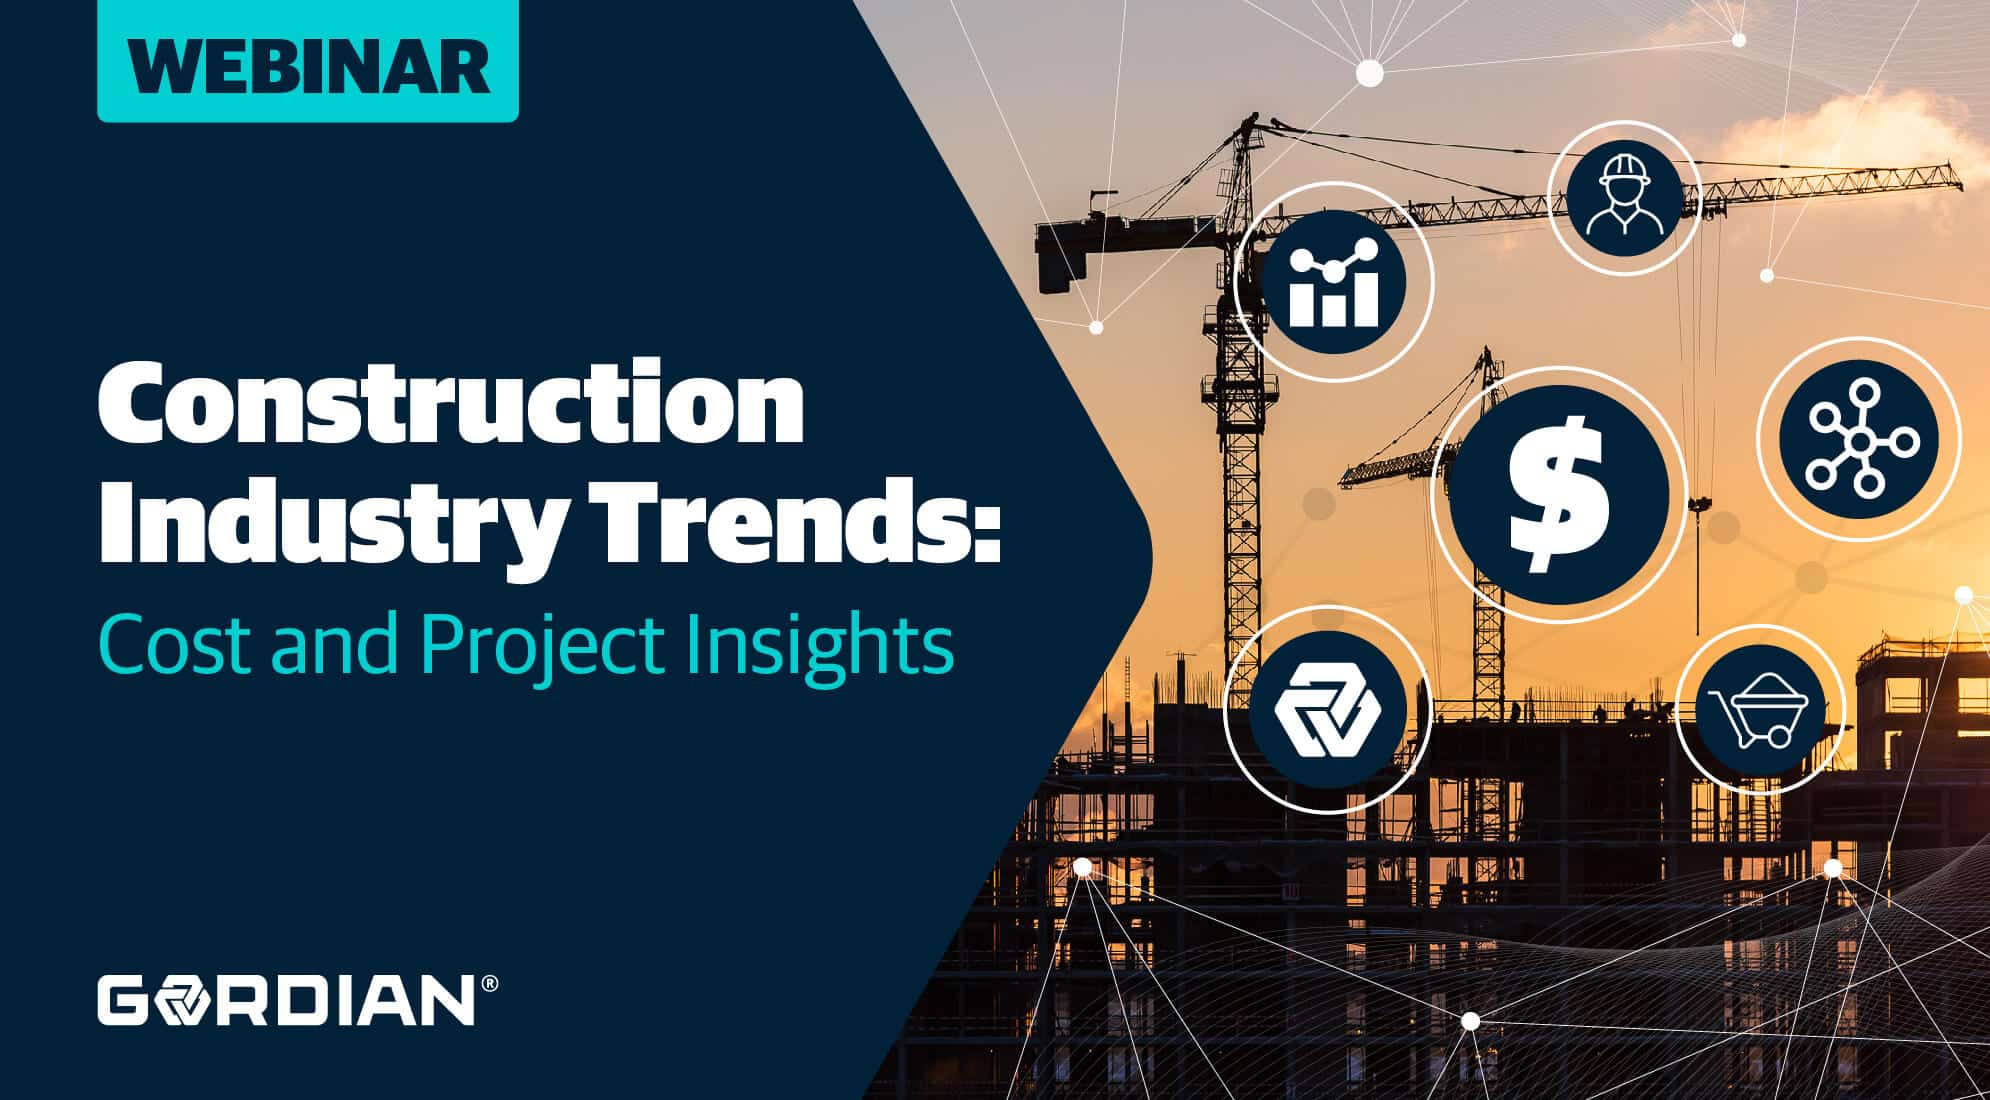 Construction Industry Trends: Cost and Project Insights 2